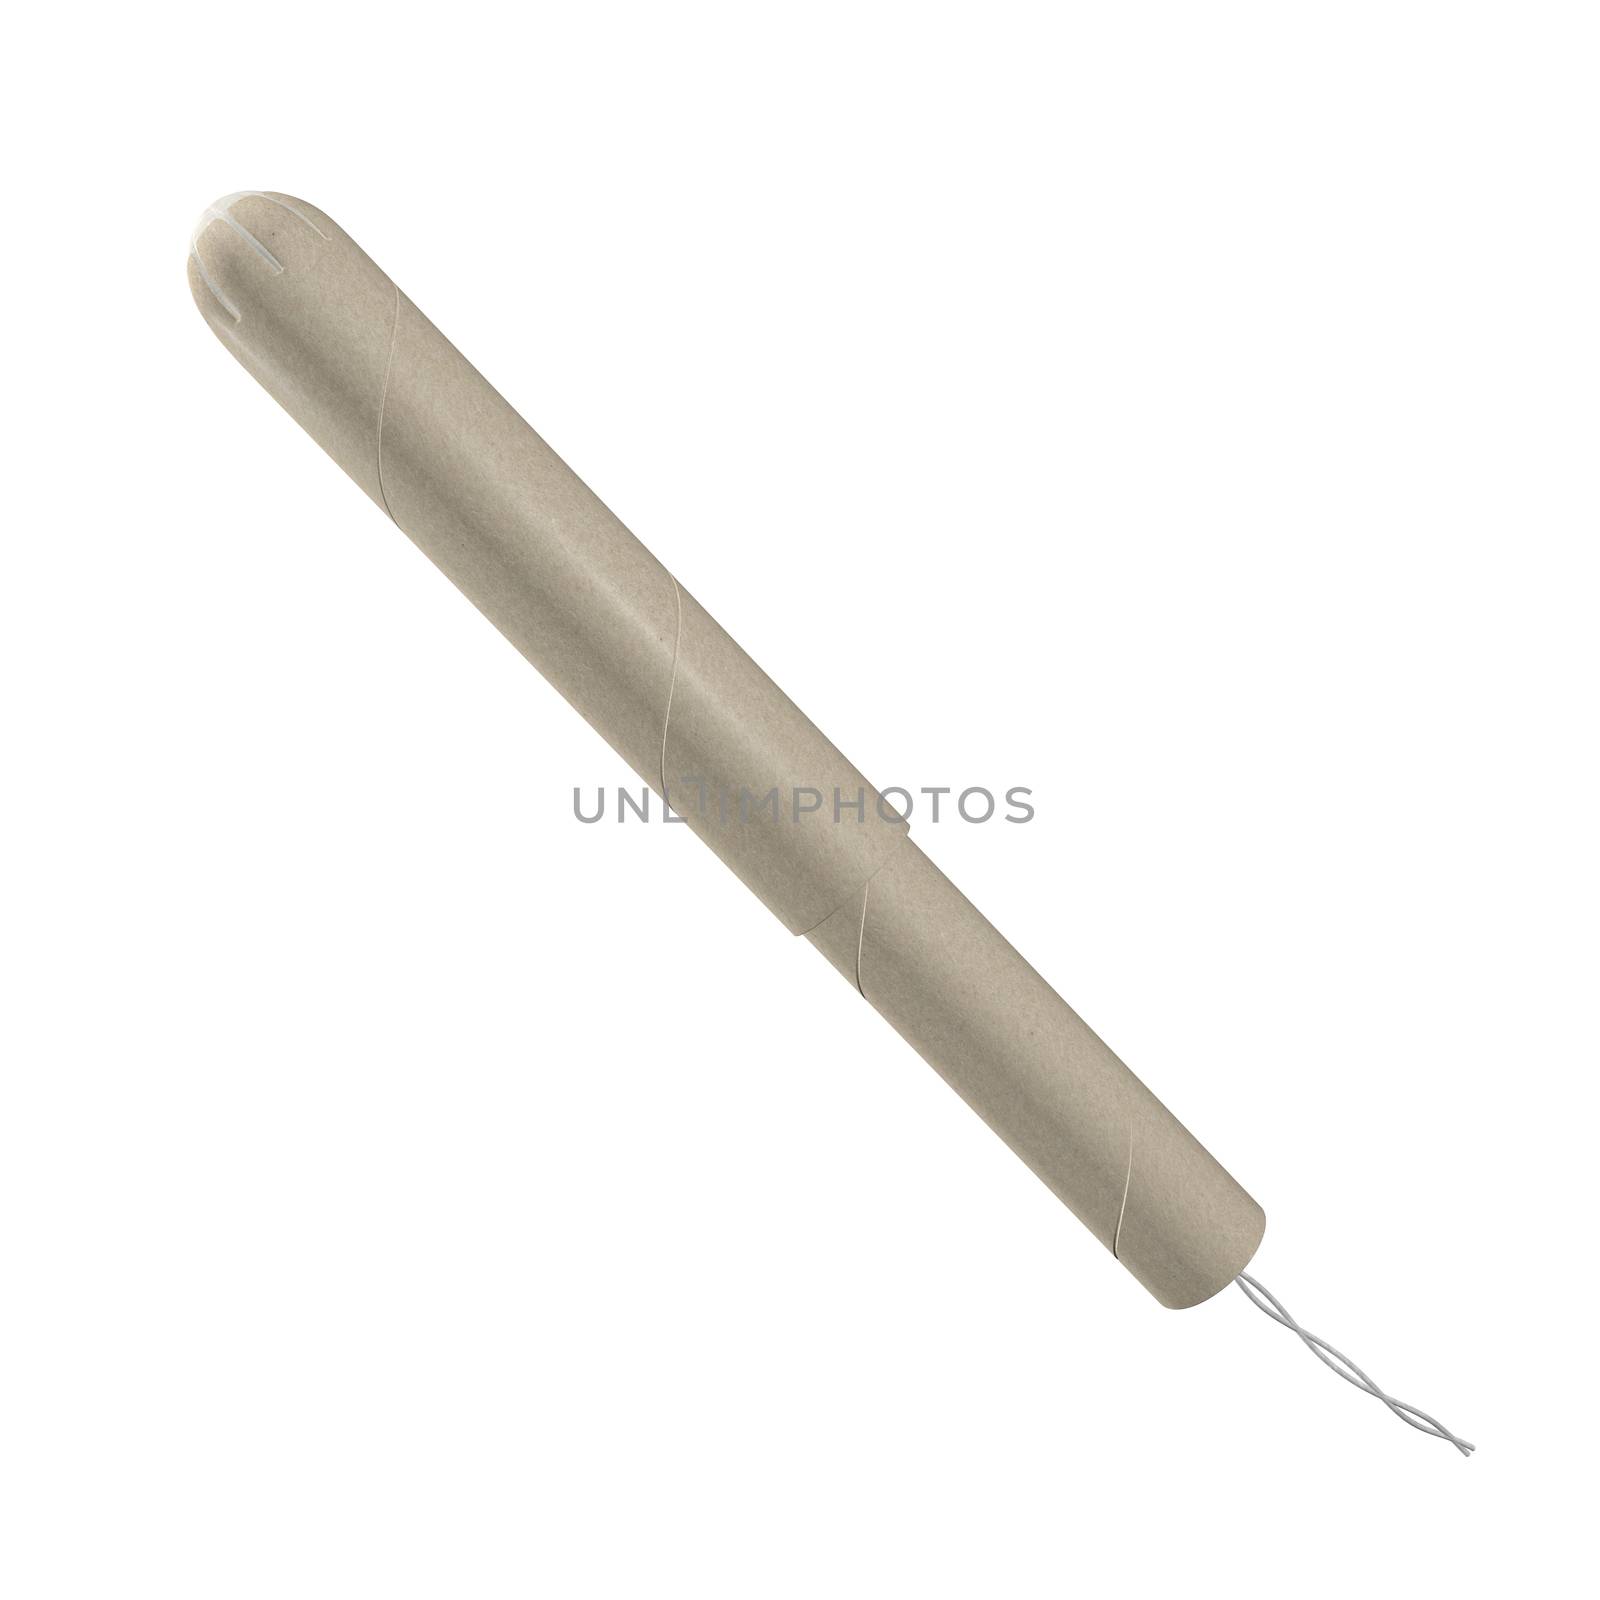 a brown cardboard applicator tampon for woman